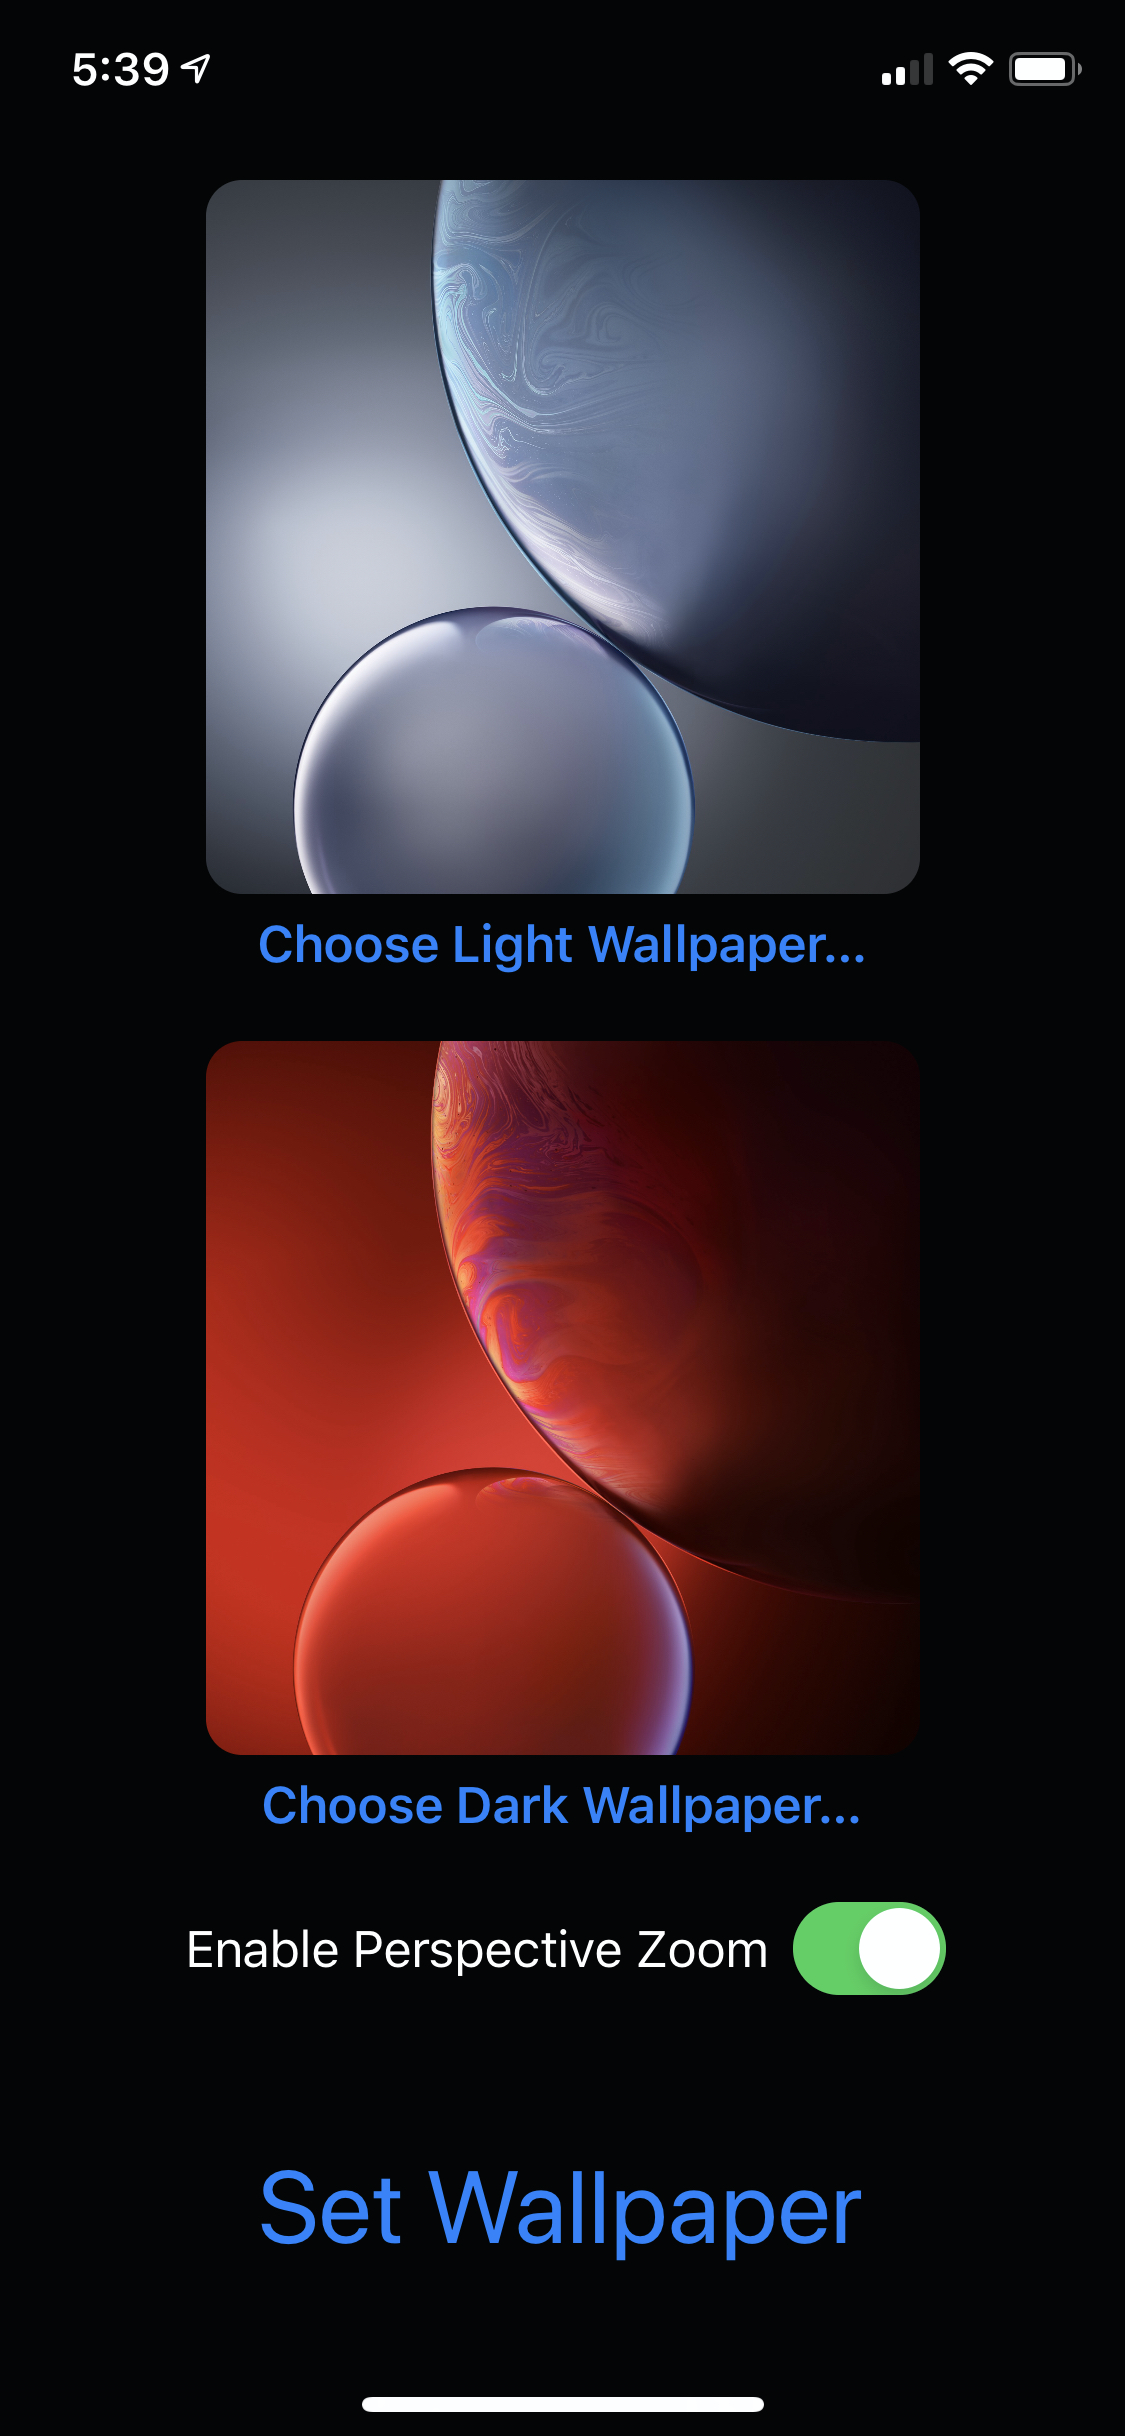 App with light and dark wallpapers ready to be set